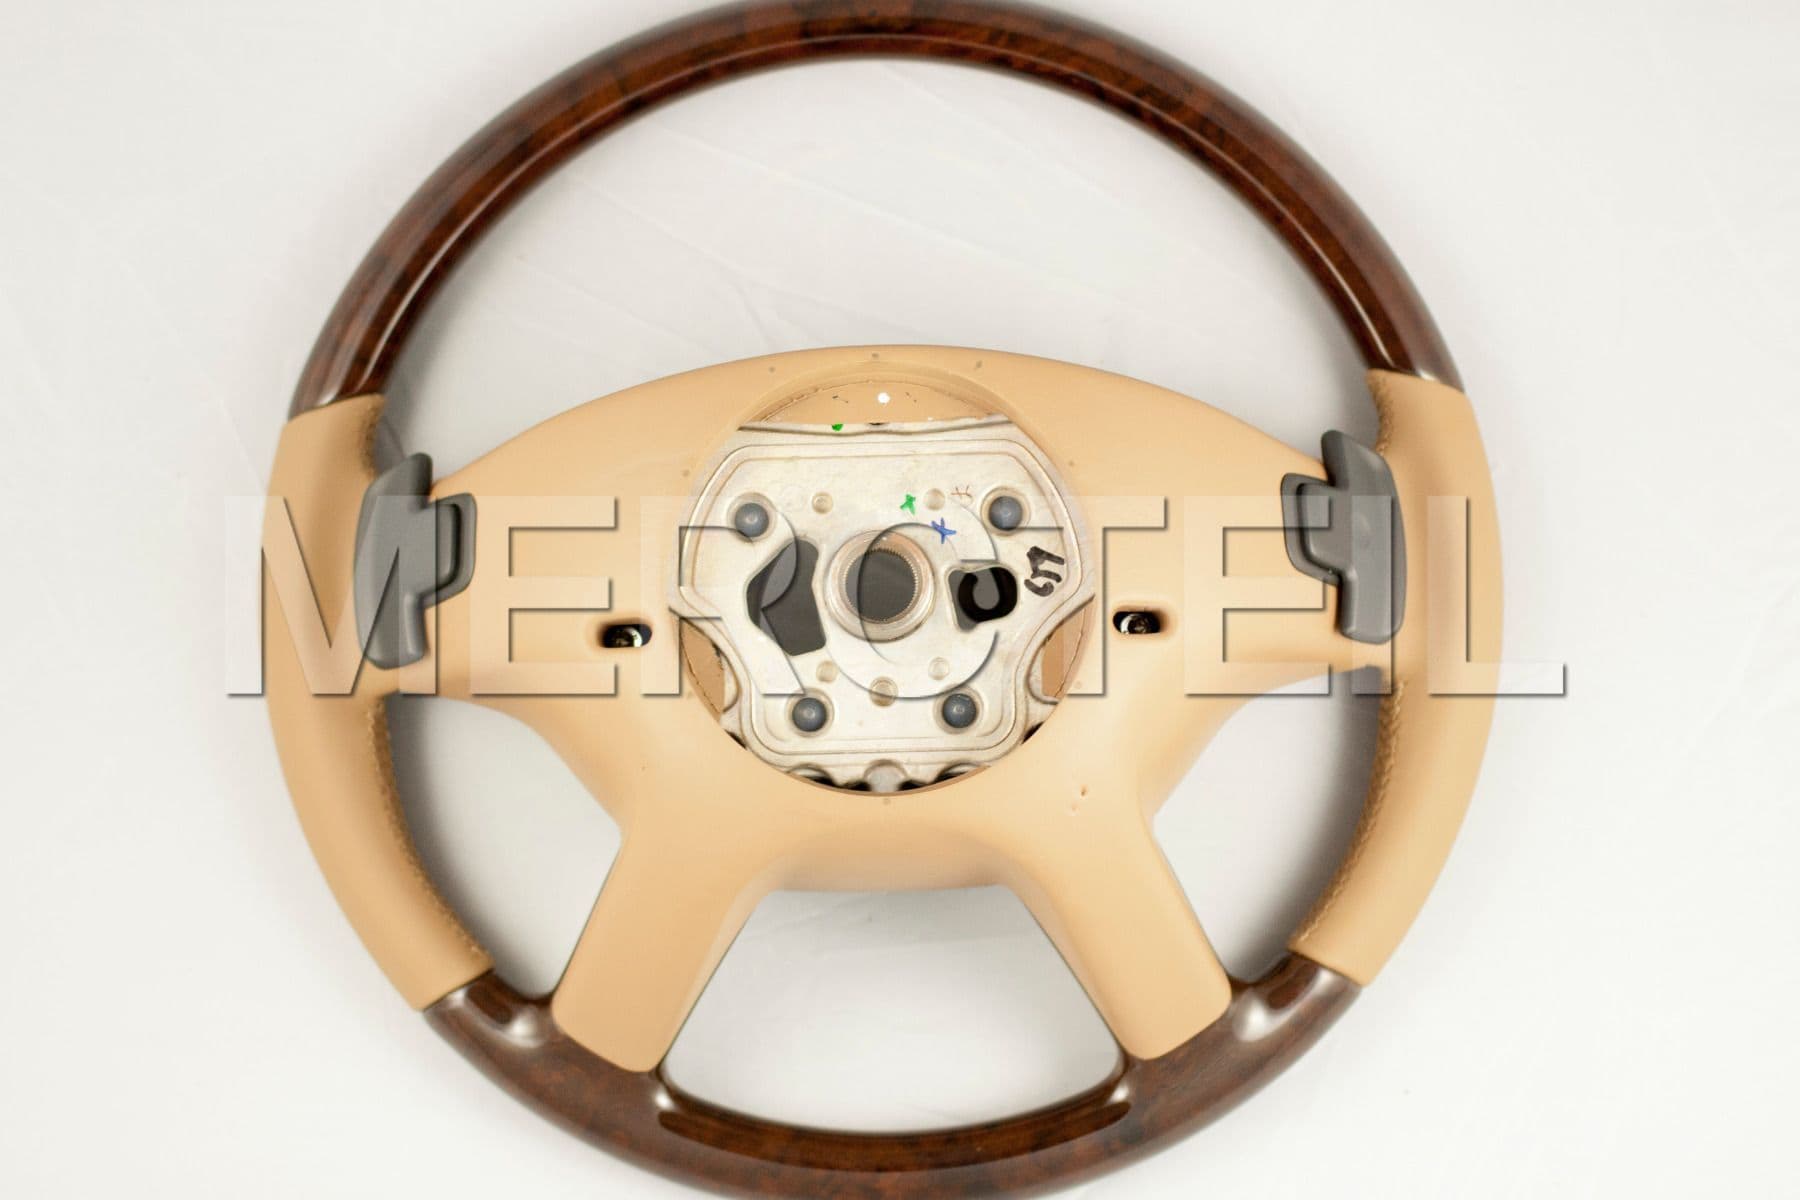 Leather Beige Steering Wheel With Burred Walnut Trims; A22146030038L41, A2214603003.